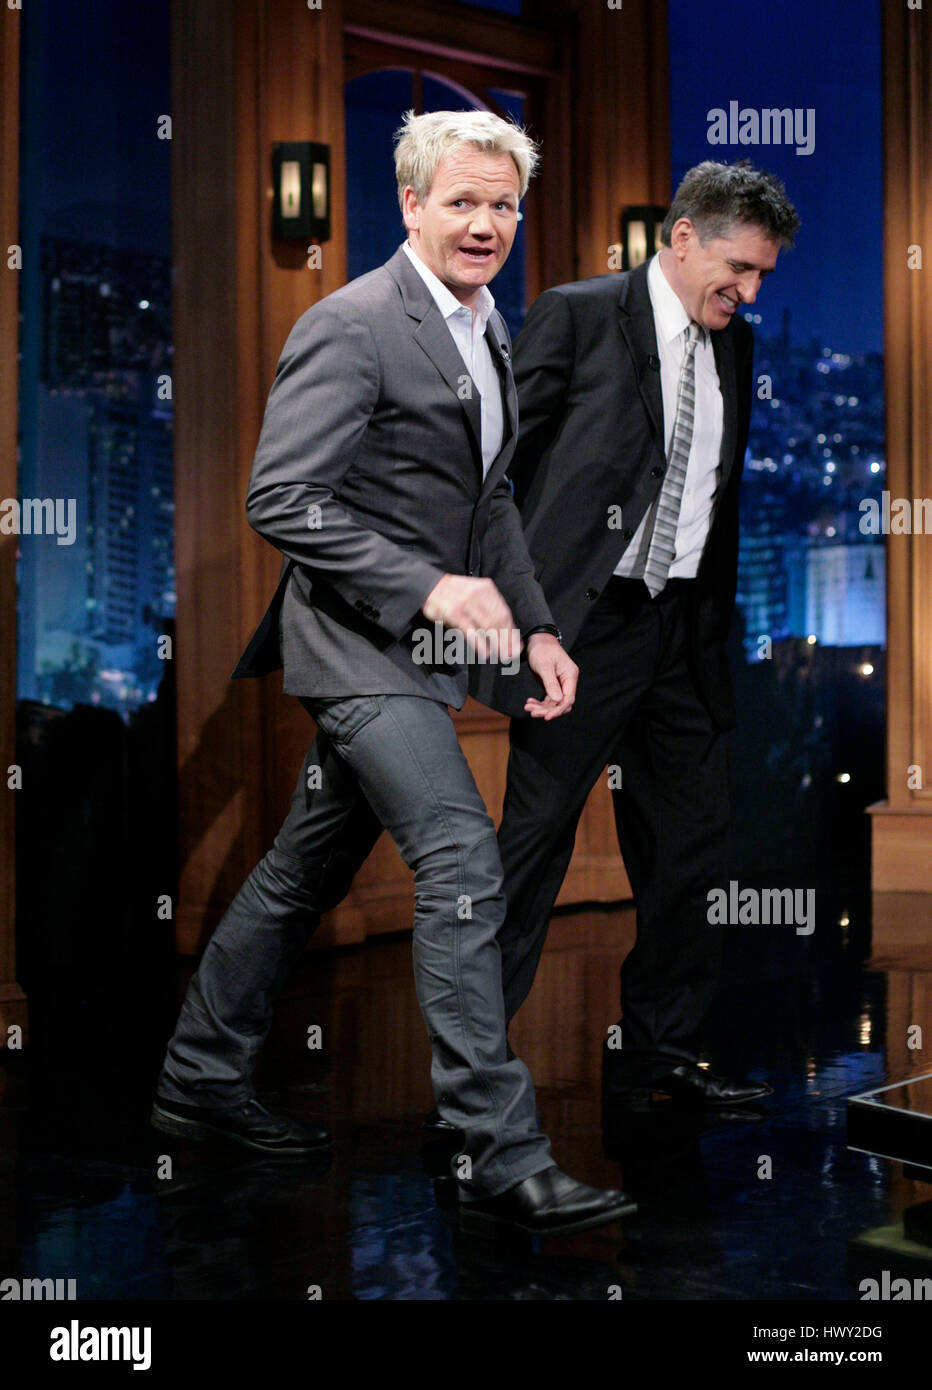 Chef Gordon Ramsay, left, with host Craig Ferguson during a segment of 'The Late Late Show with Craig Ferguson' at CBS Television City in Los Angeles, California, on March 10, 2009. Photo by Francis Specker Stock Photo